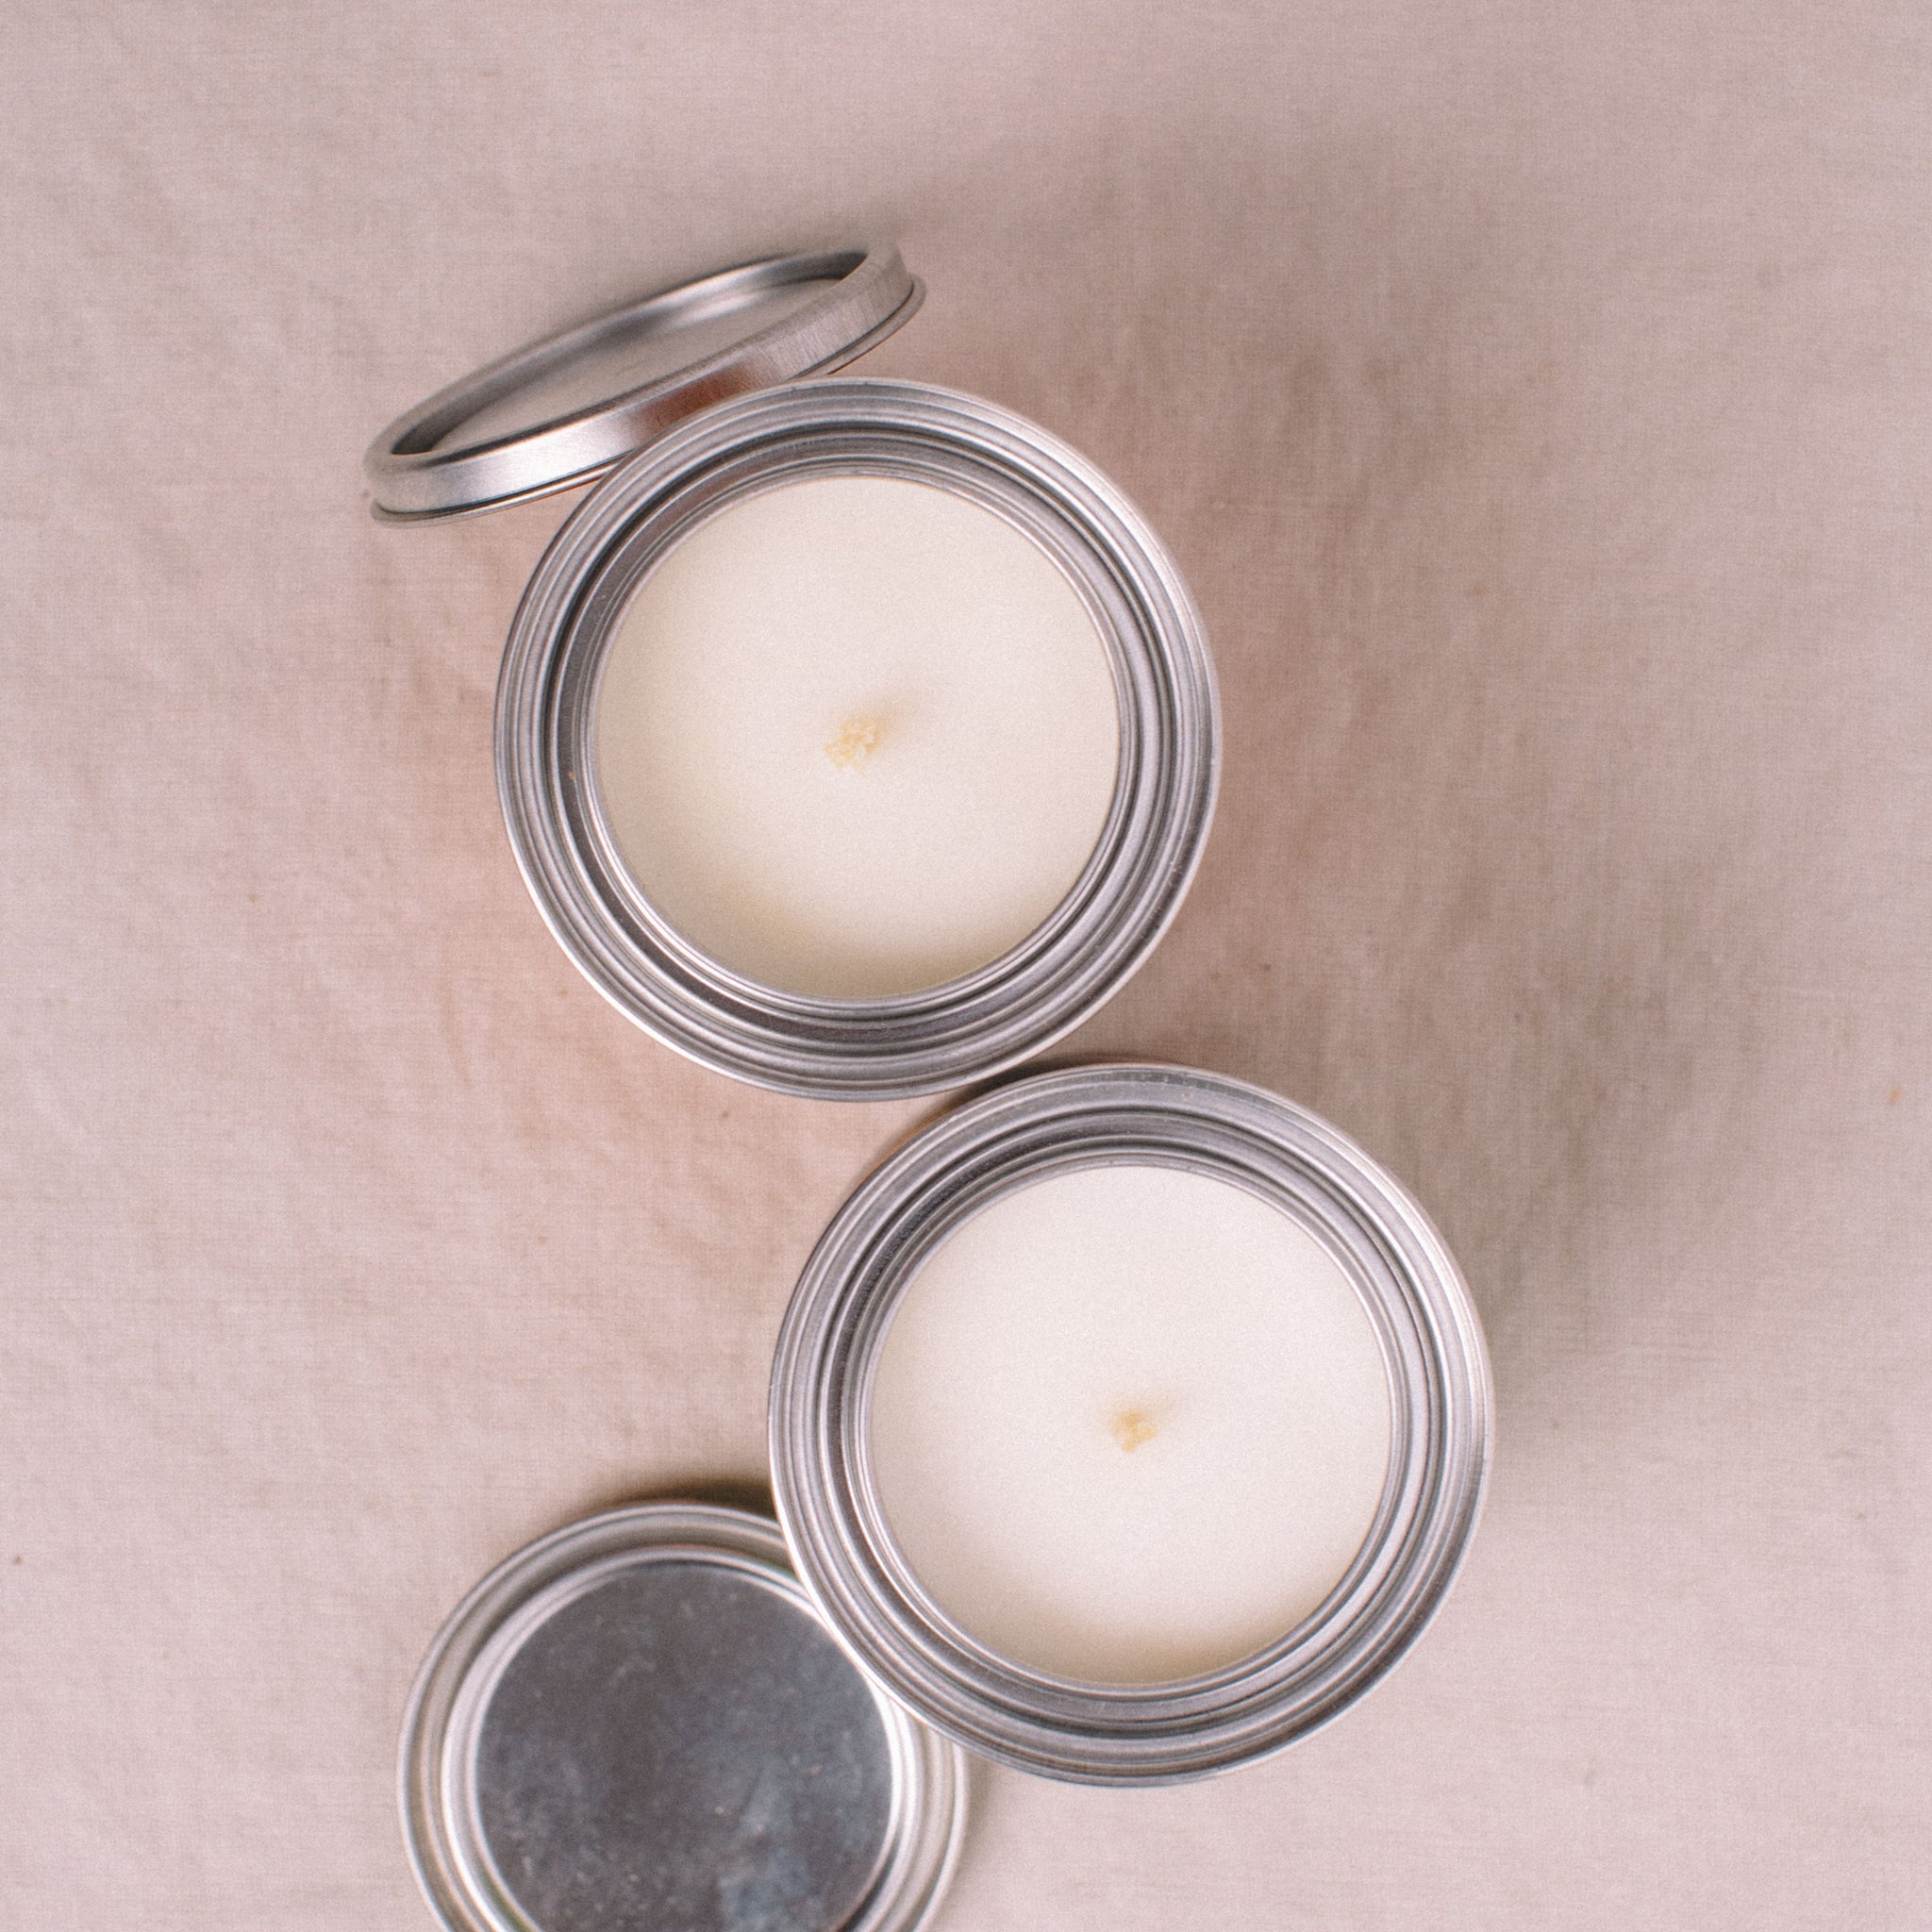 OJAI CANDLE || THISTLE & FIG